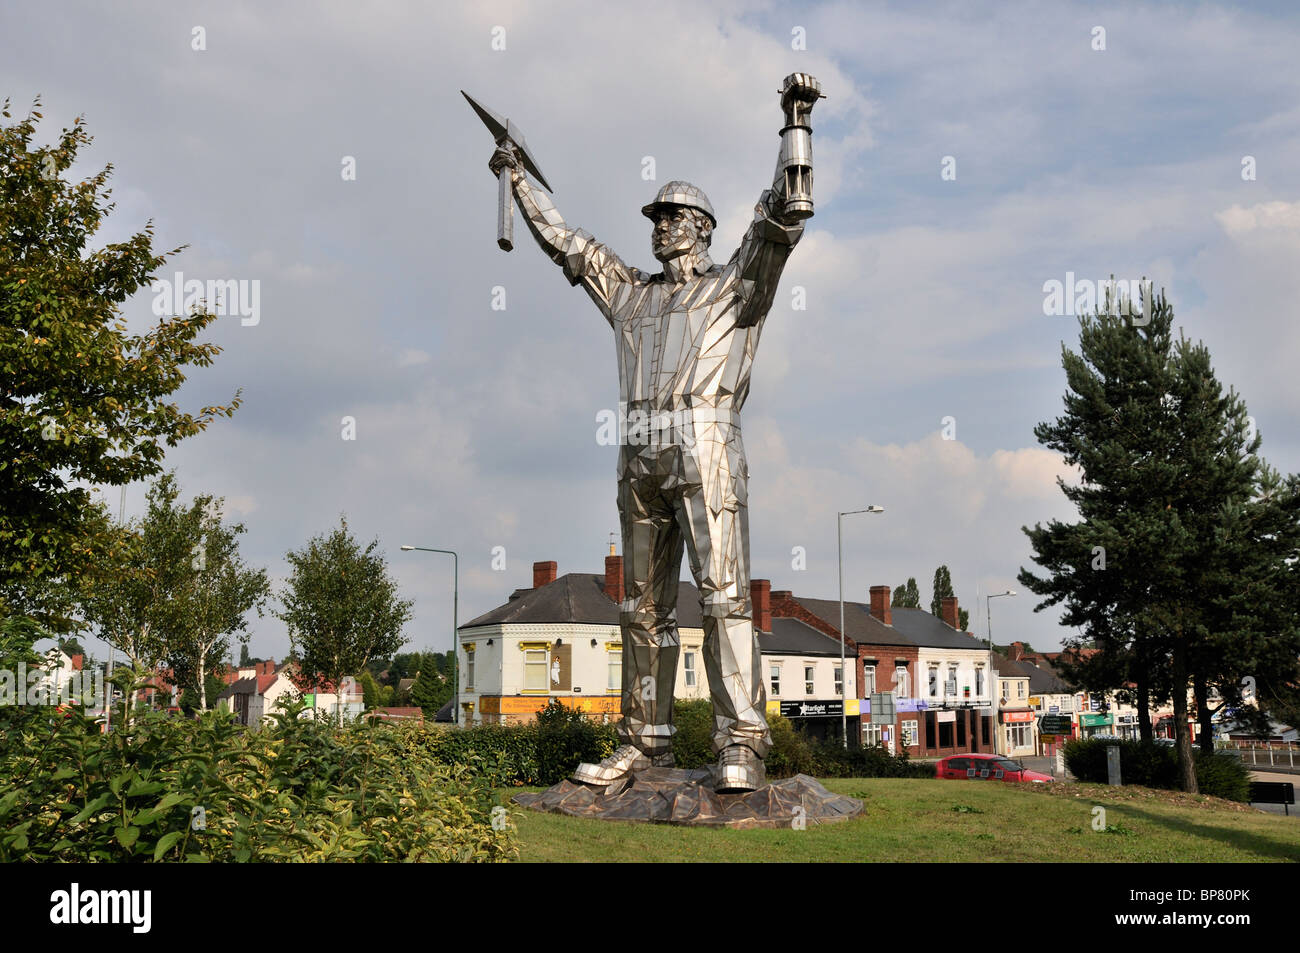 The Brownhills Miner designed and sculpted by John Mckenna and installed on a traffic island at a busy roads intersection Stock Photo